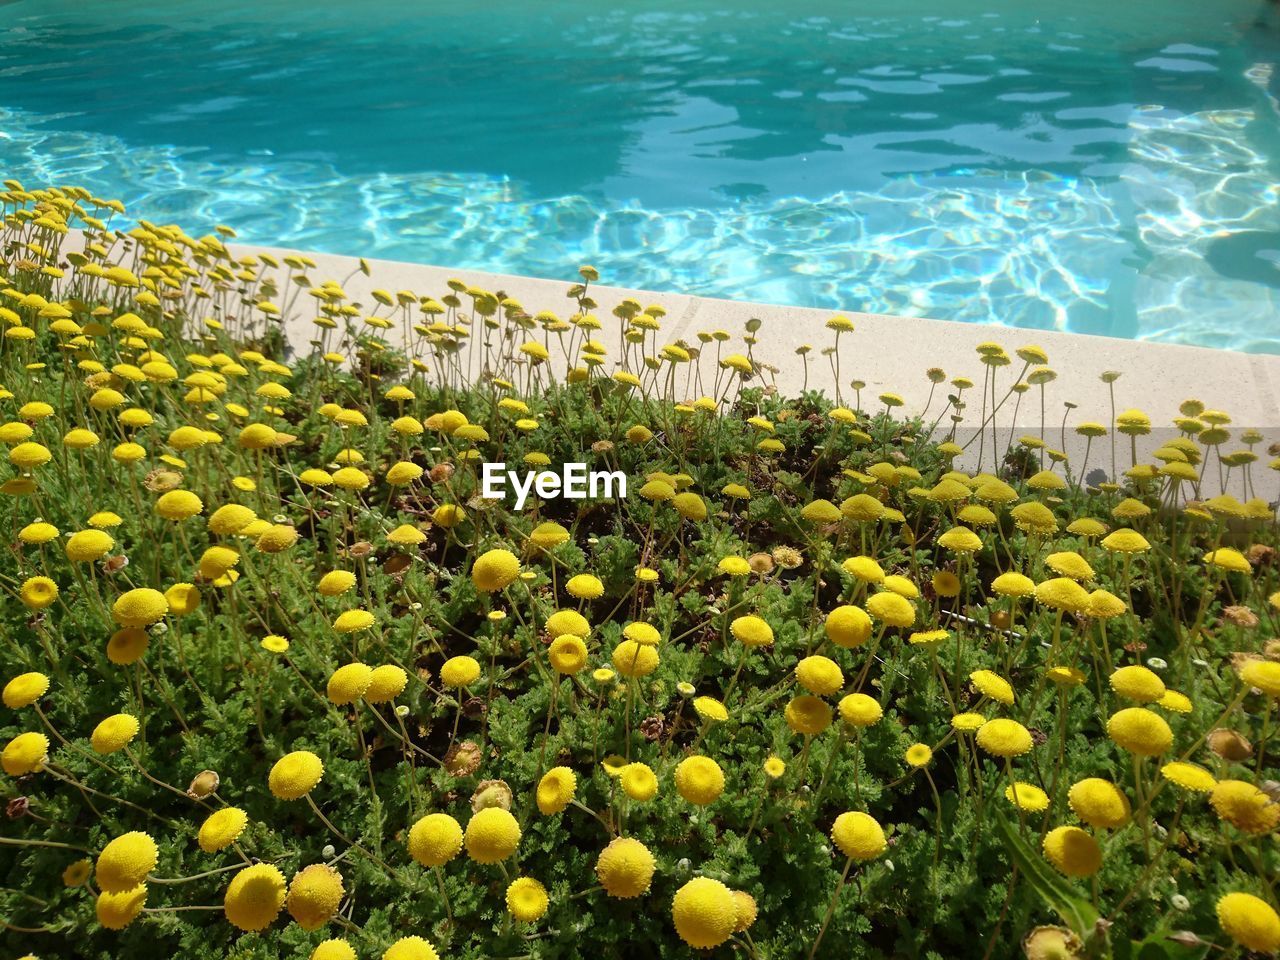 HIGH ANGLE VIEW OF YELLOW FLOWERING PLANTS AT SWIMMING POOL